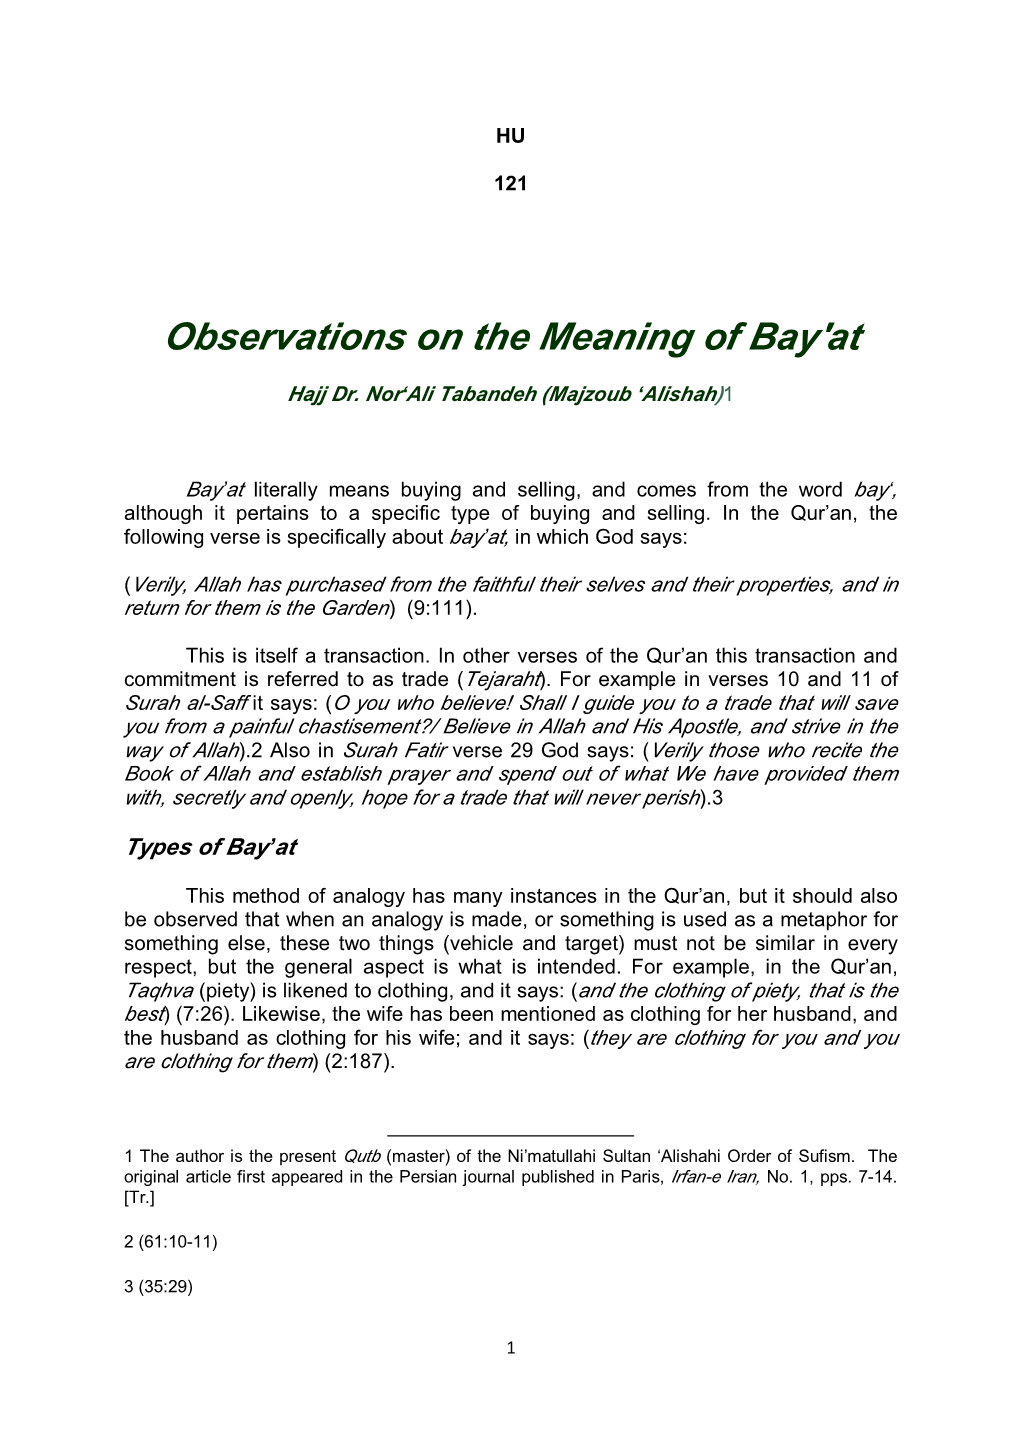 Observations on the Meaning of Bayat